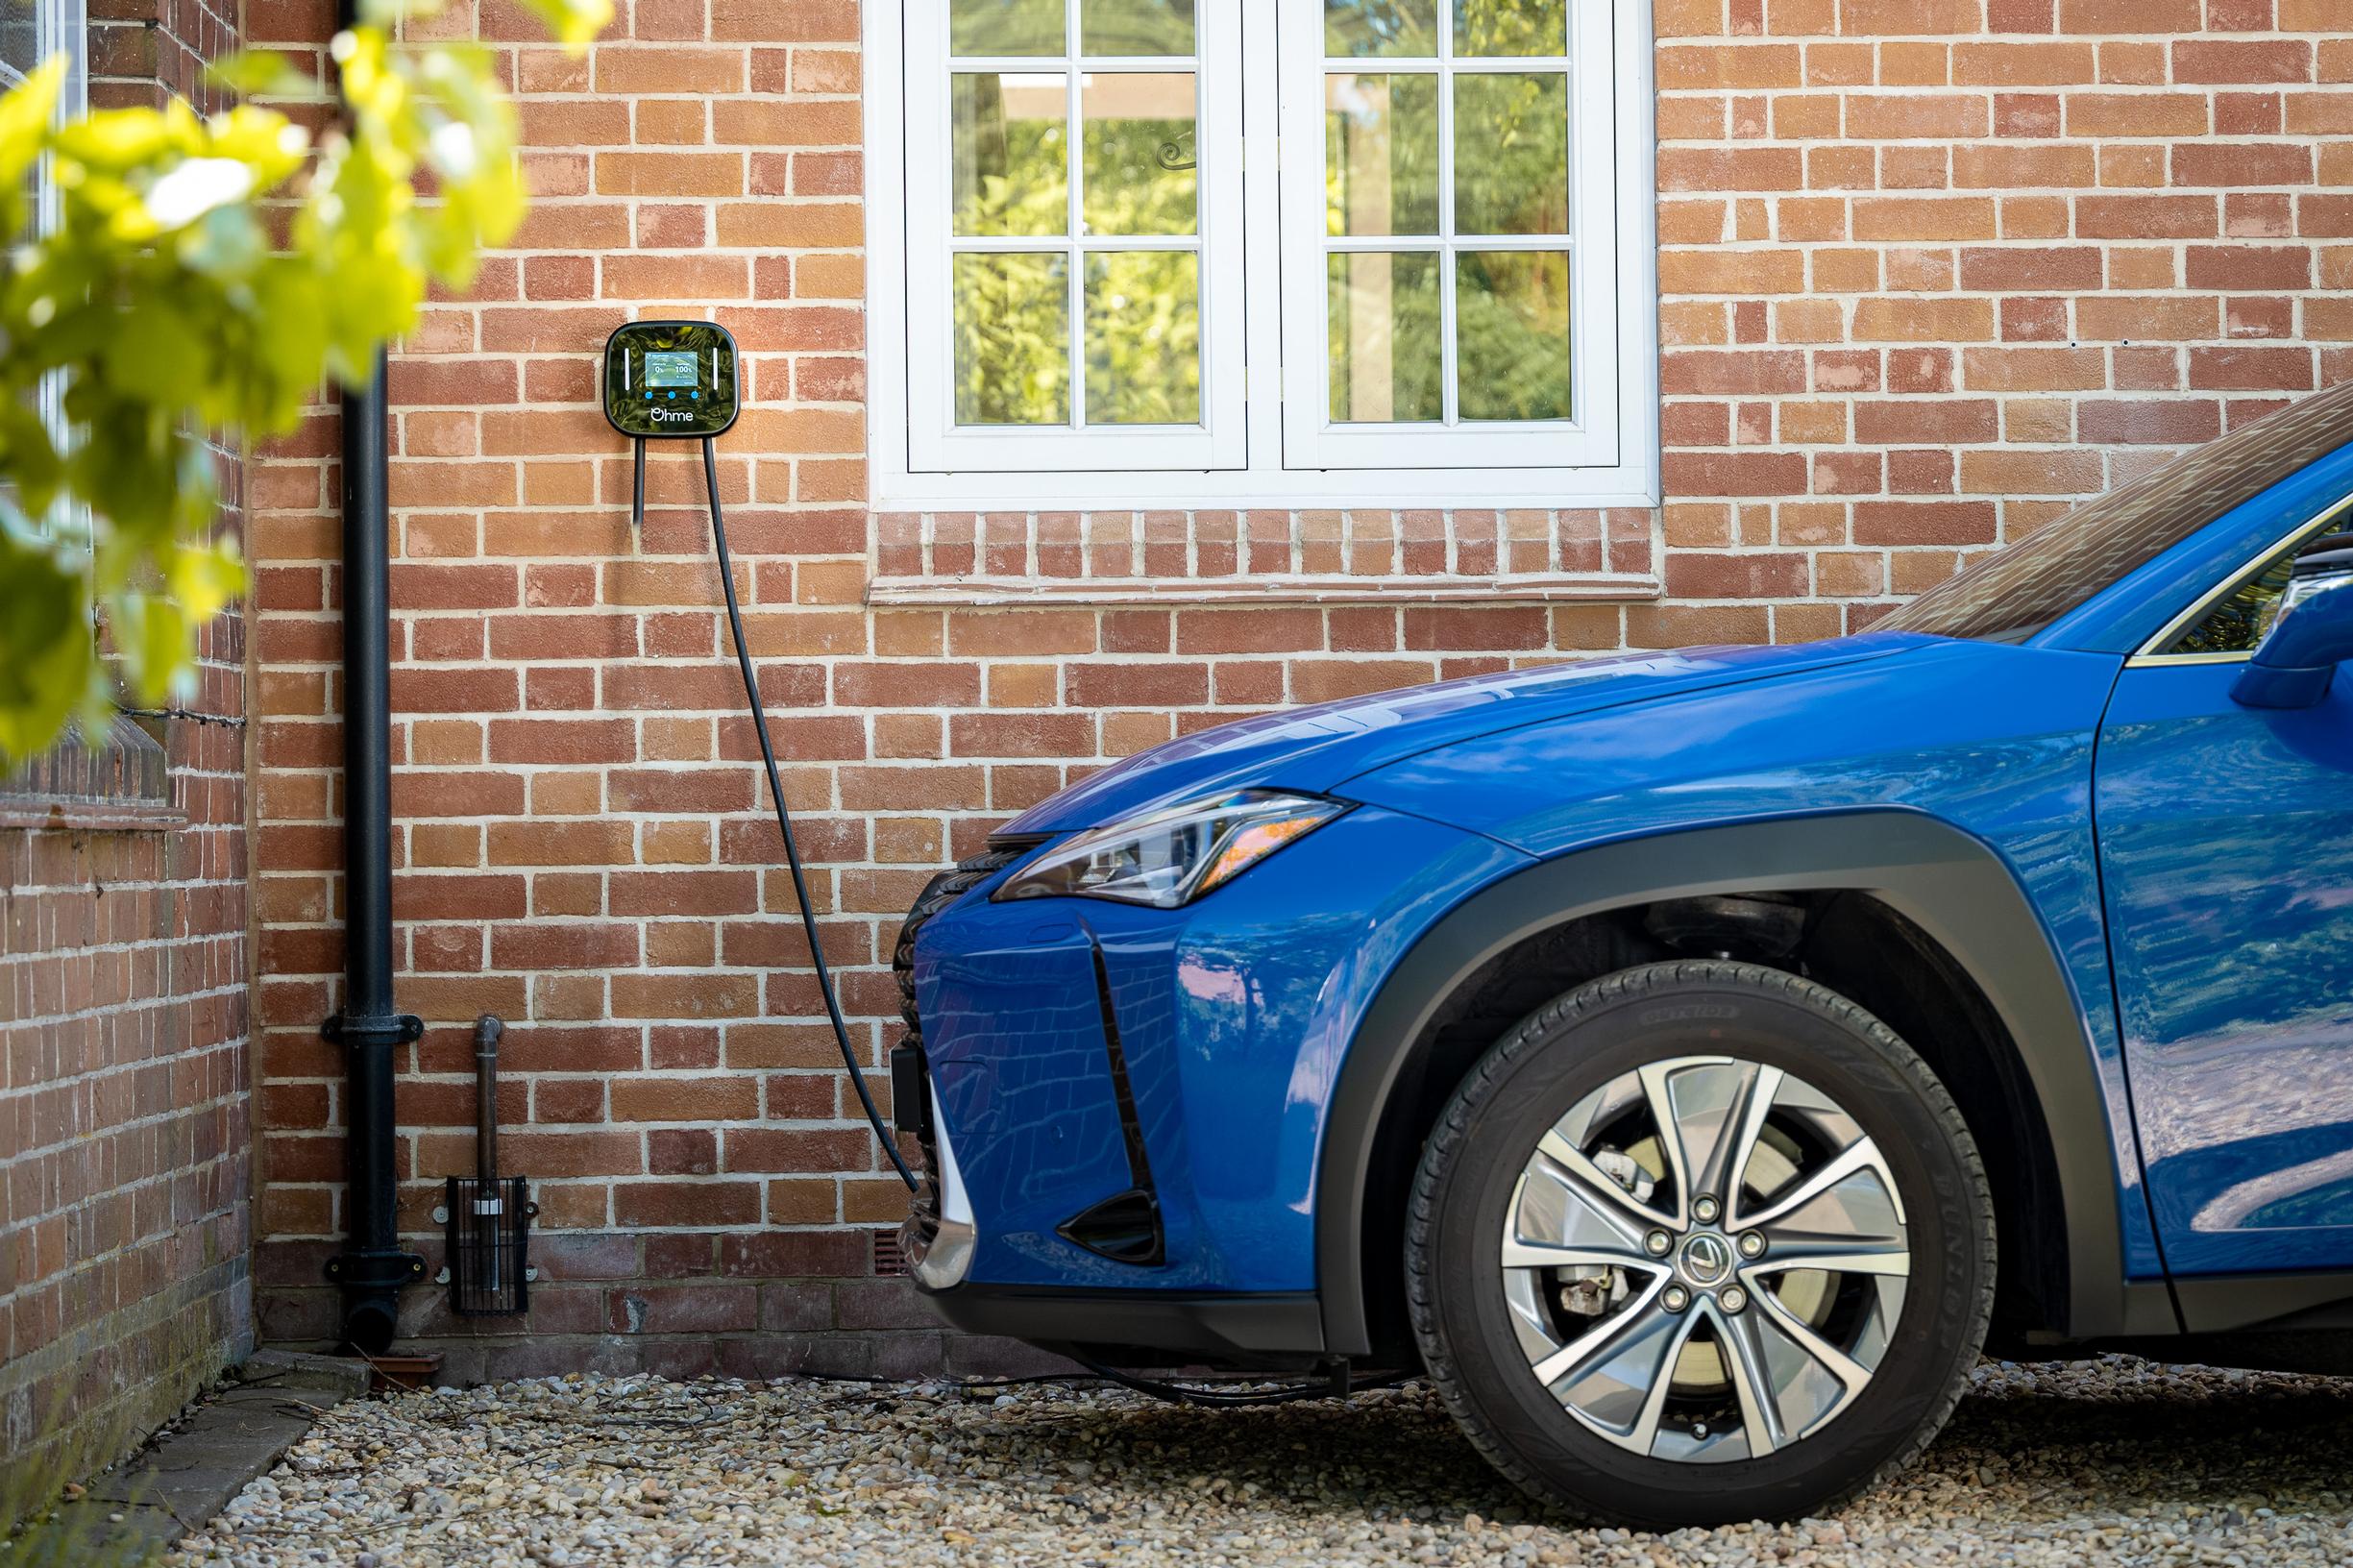 With household finances under increasing pressure, there has never been a more important time for new, existing and future EV drivers to improve their awareness of the new technology